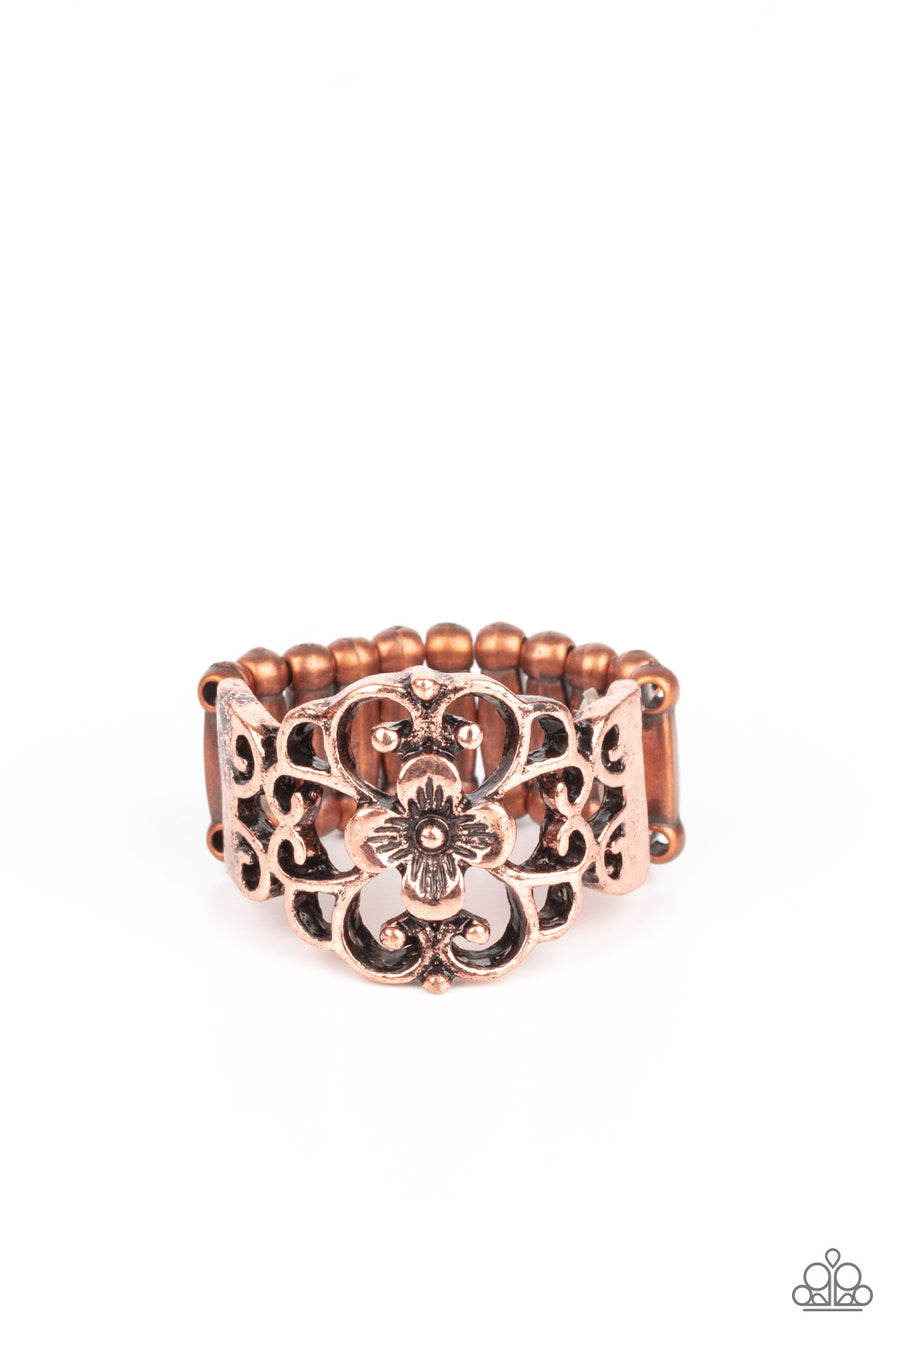 Fanciful Flower Gardens - Copper Ring - Paparazzi Accessories - Glistening copper filigree blooms from a shimmery floral center, creating a whimsical band across the finger. Features a stretchy band for a flexible fit. Sold as one individual ring.